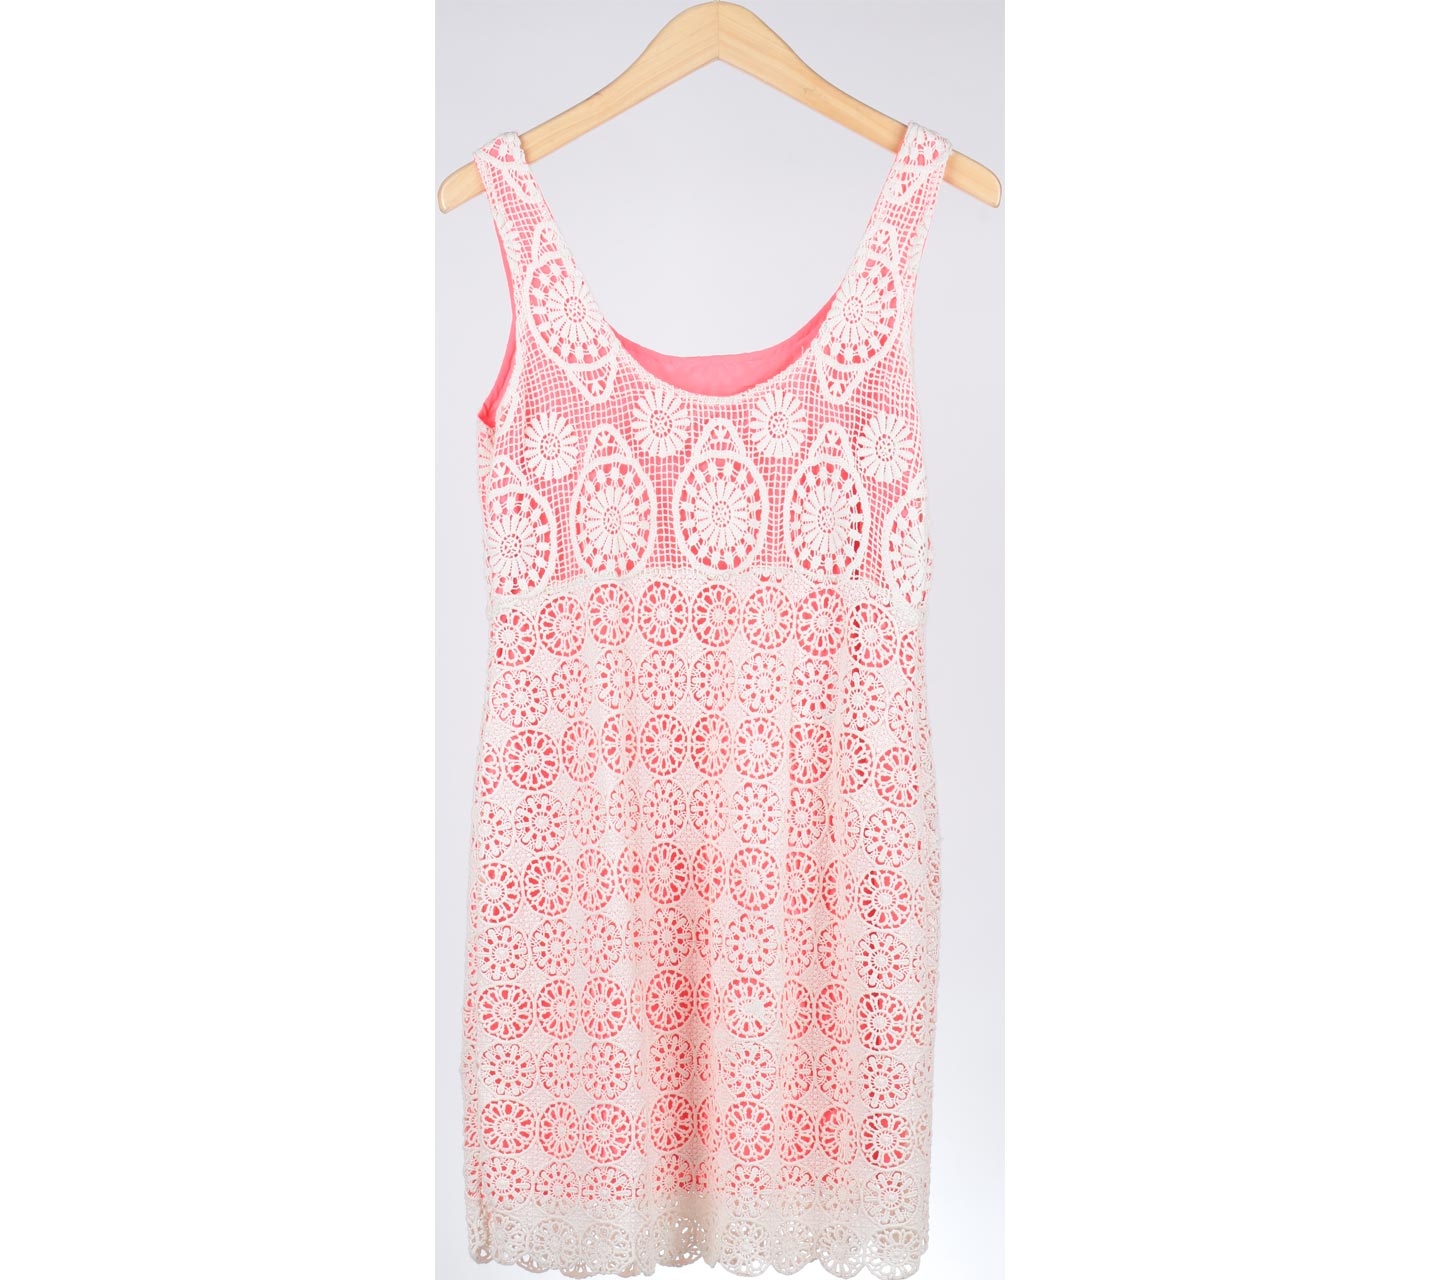 Suite Blanco Pink And Cream Perforated Mini Dress